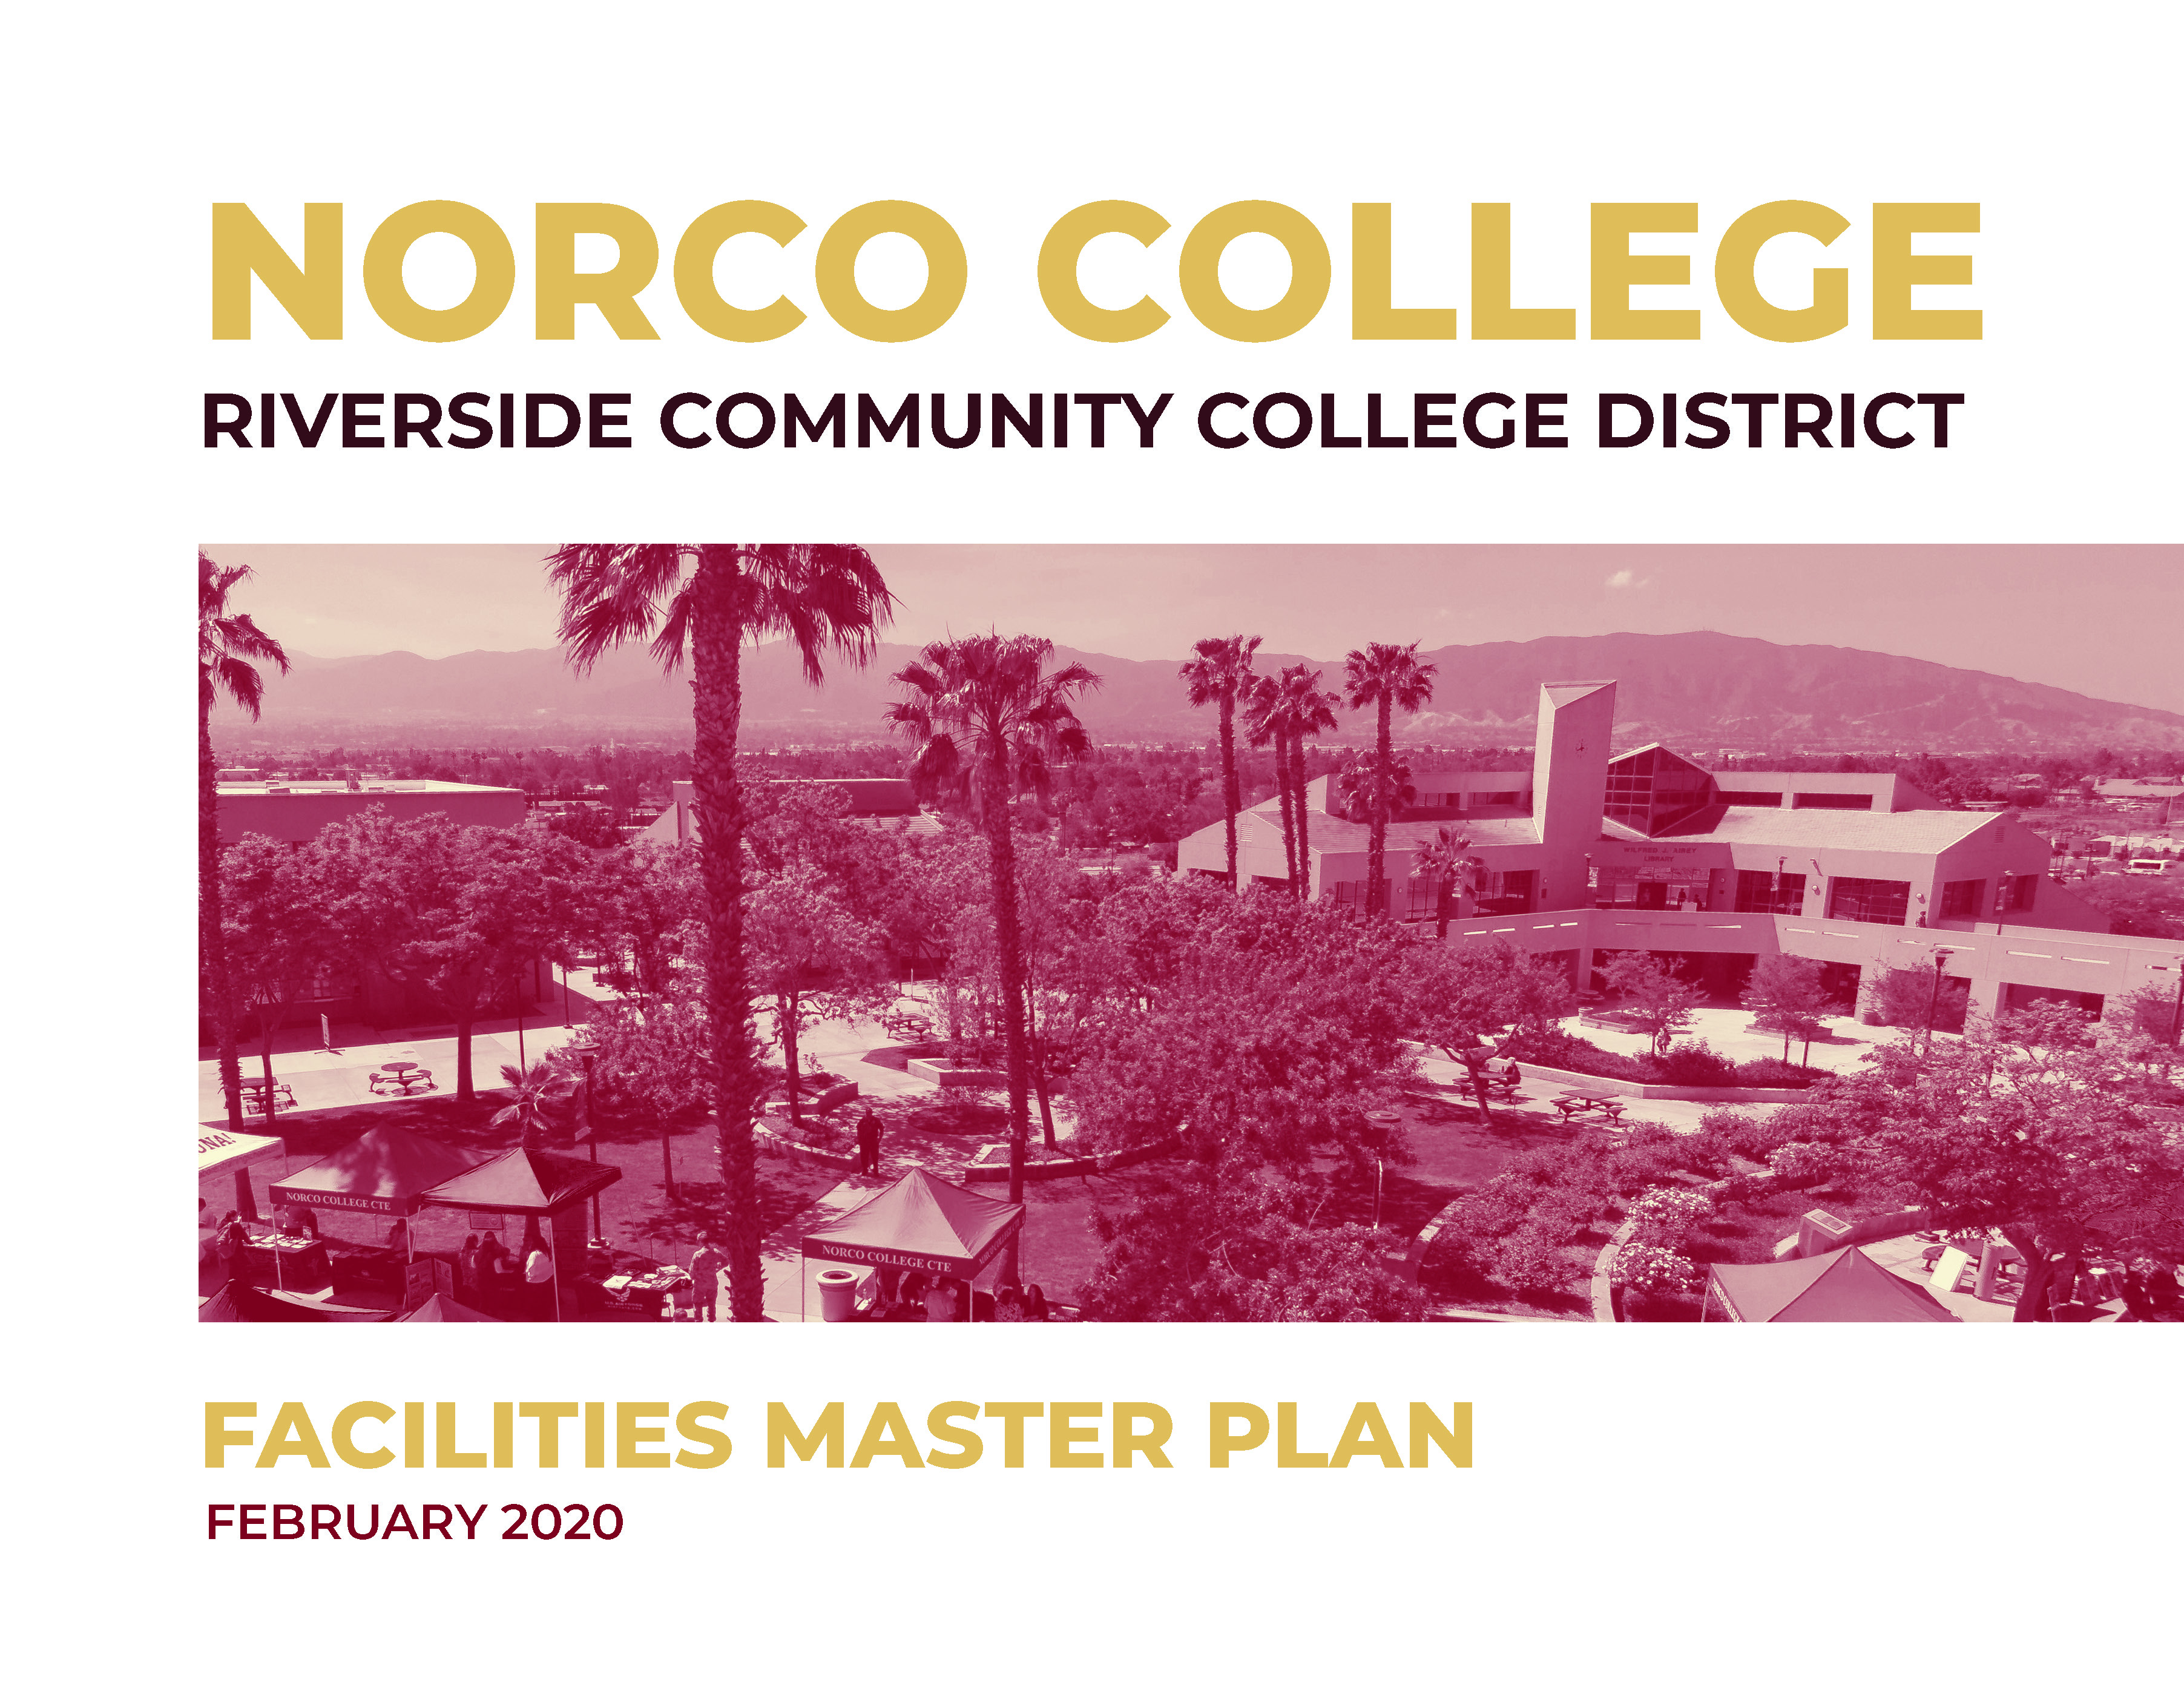 Norco College Facilities Master Plan February 2020